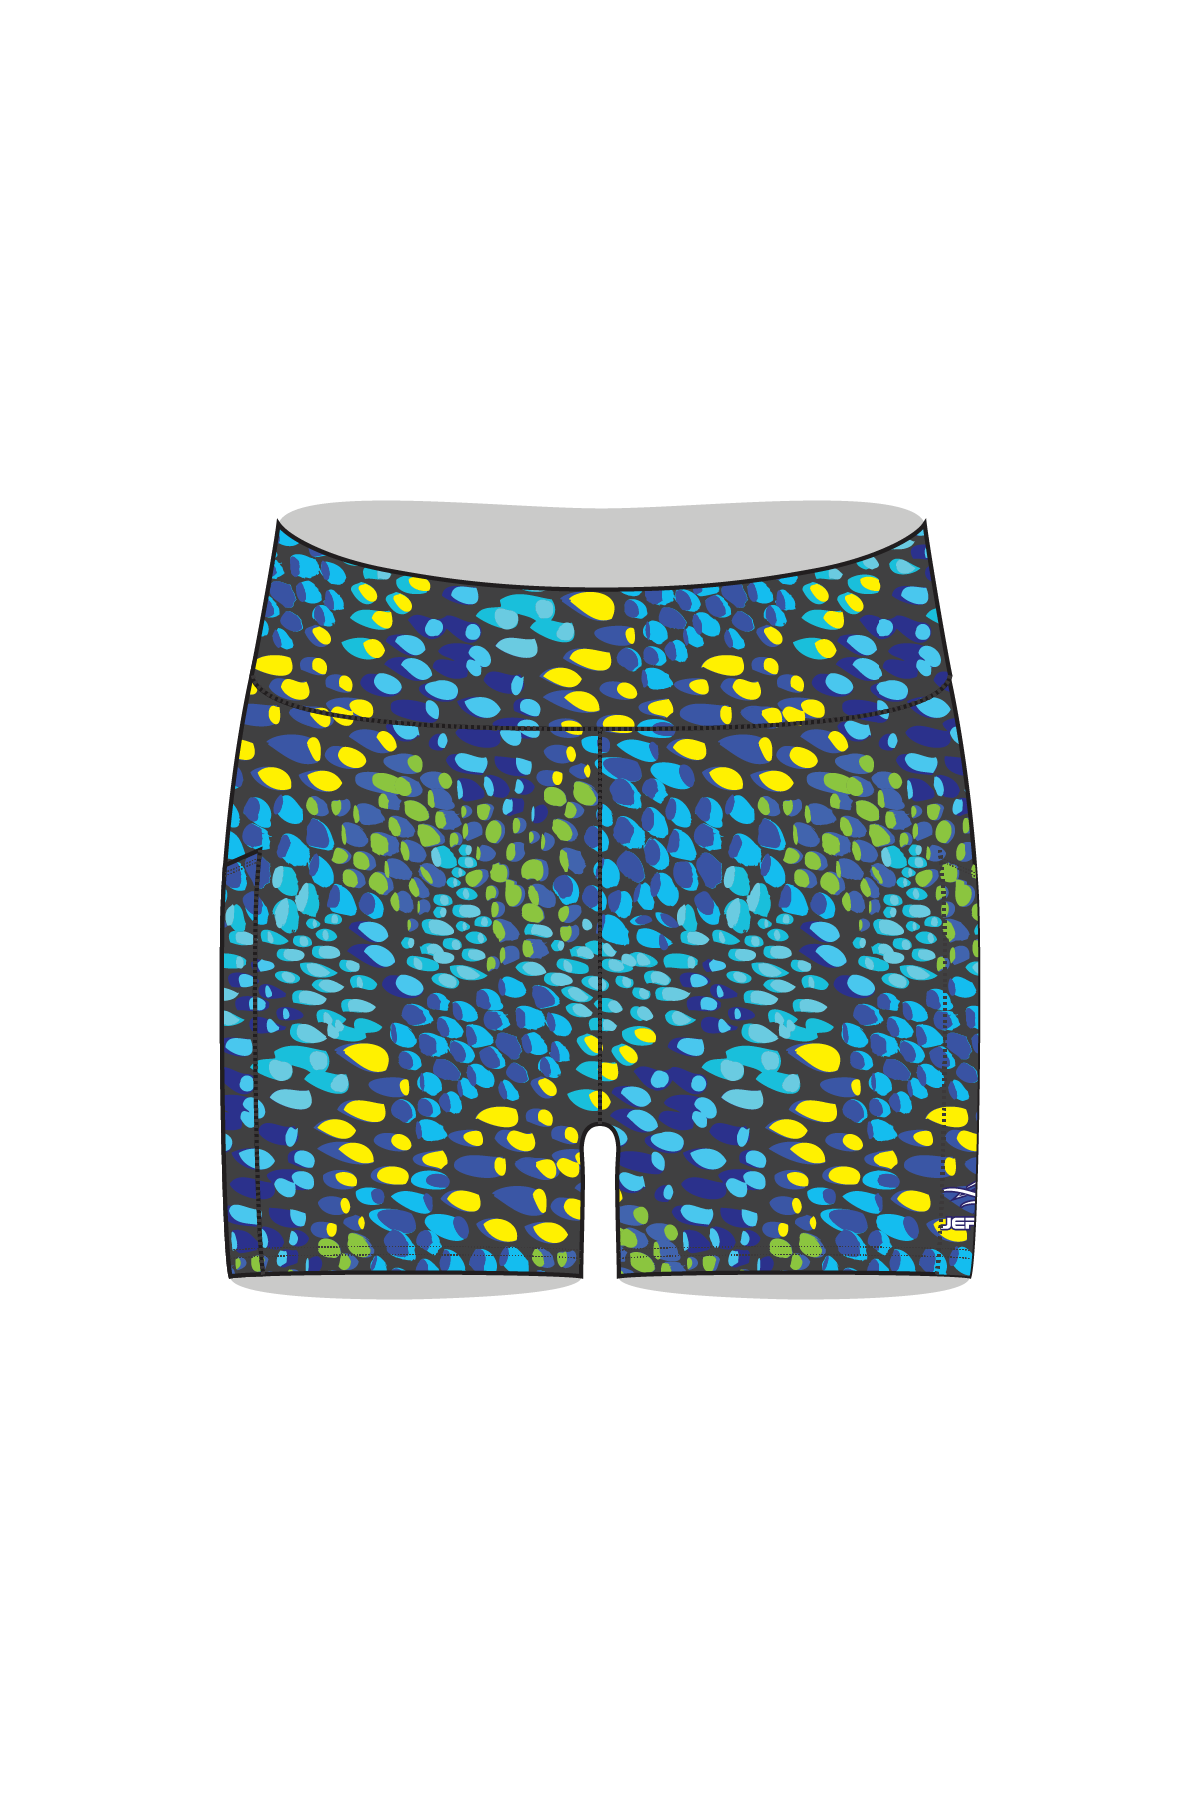 Women's Jervis Bay Mid Thigh Shorts